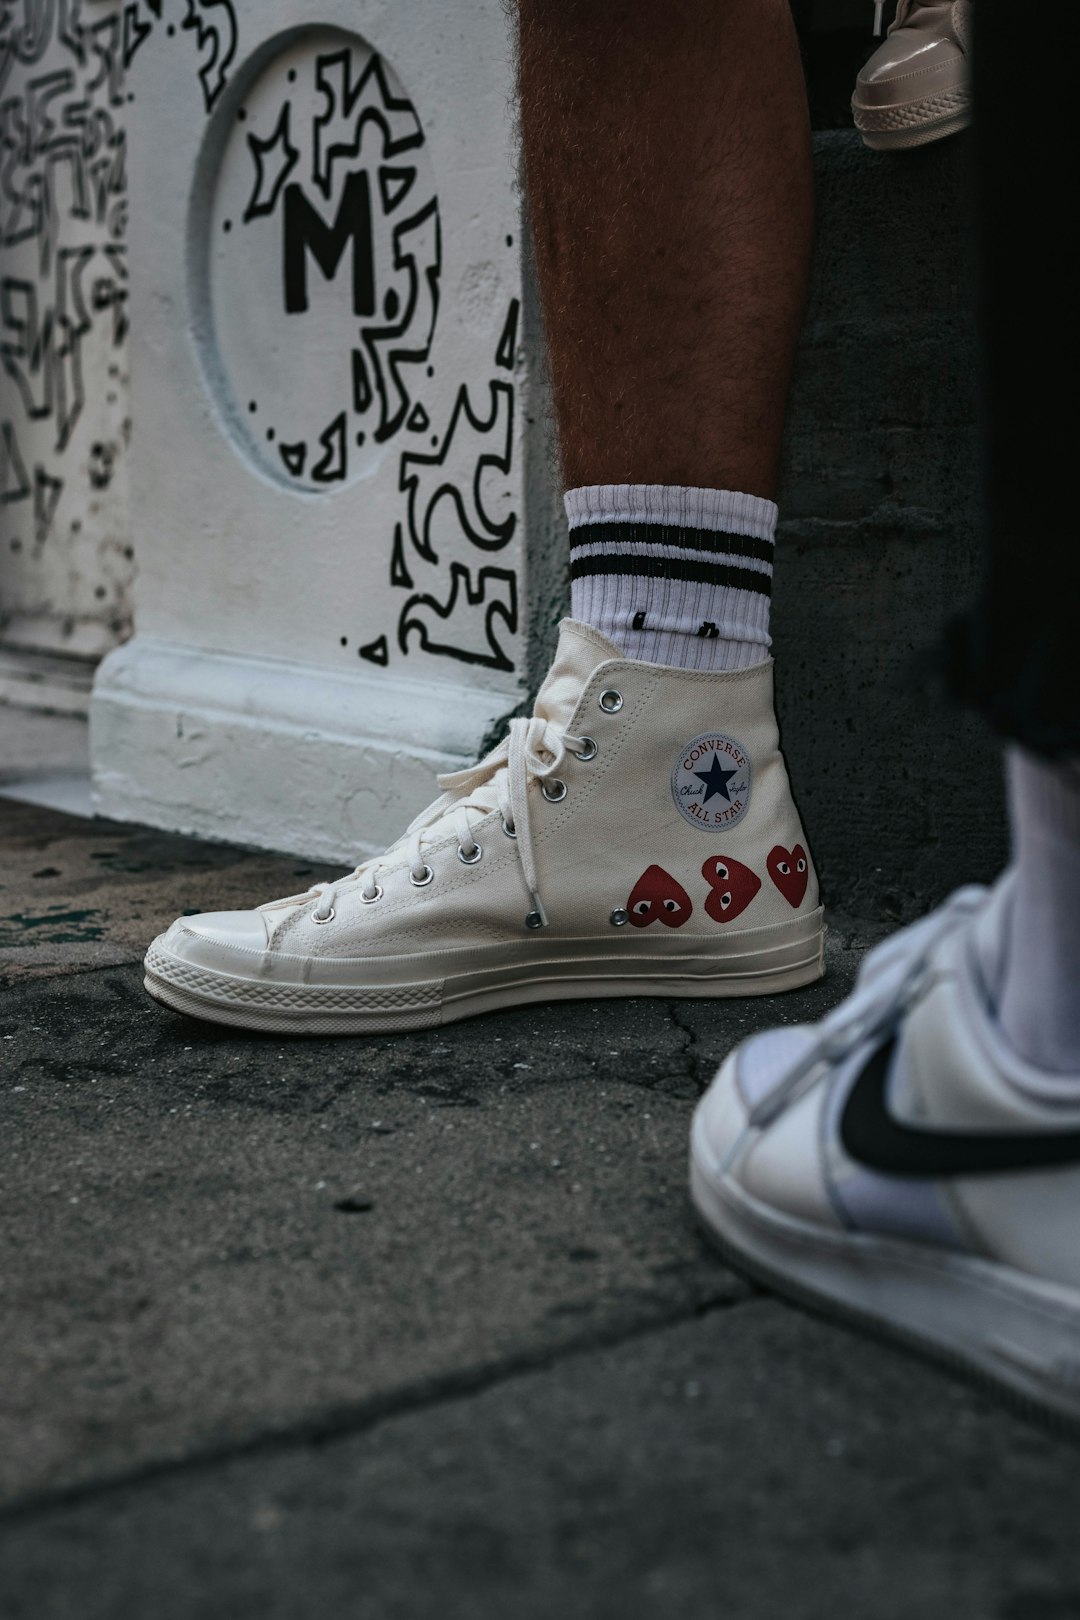 person wearing white sneakers